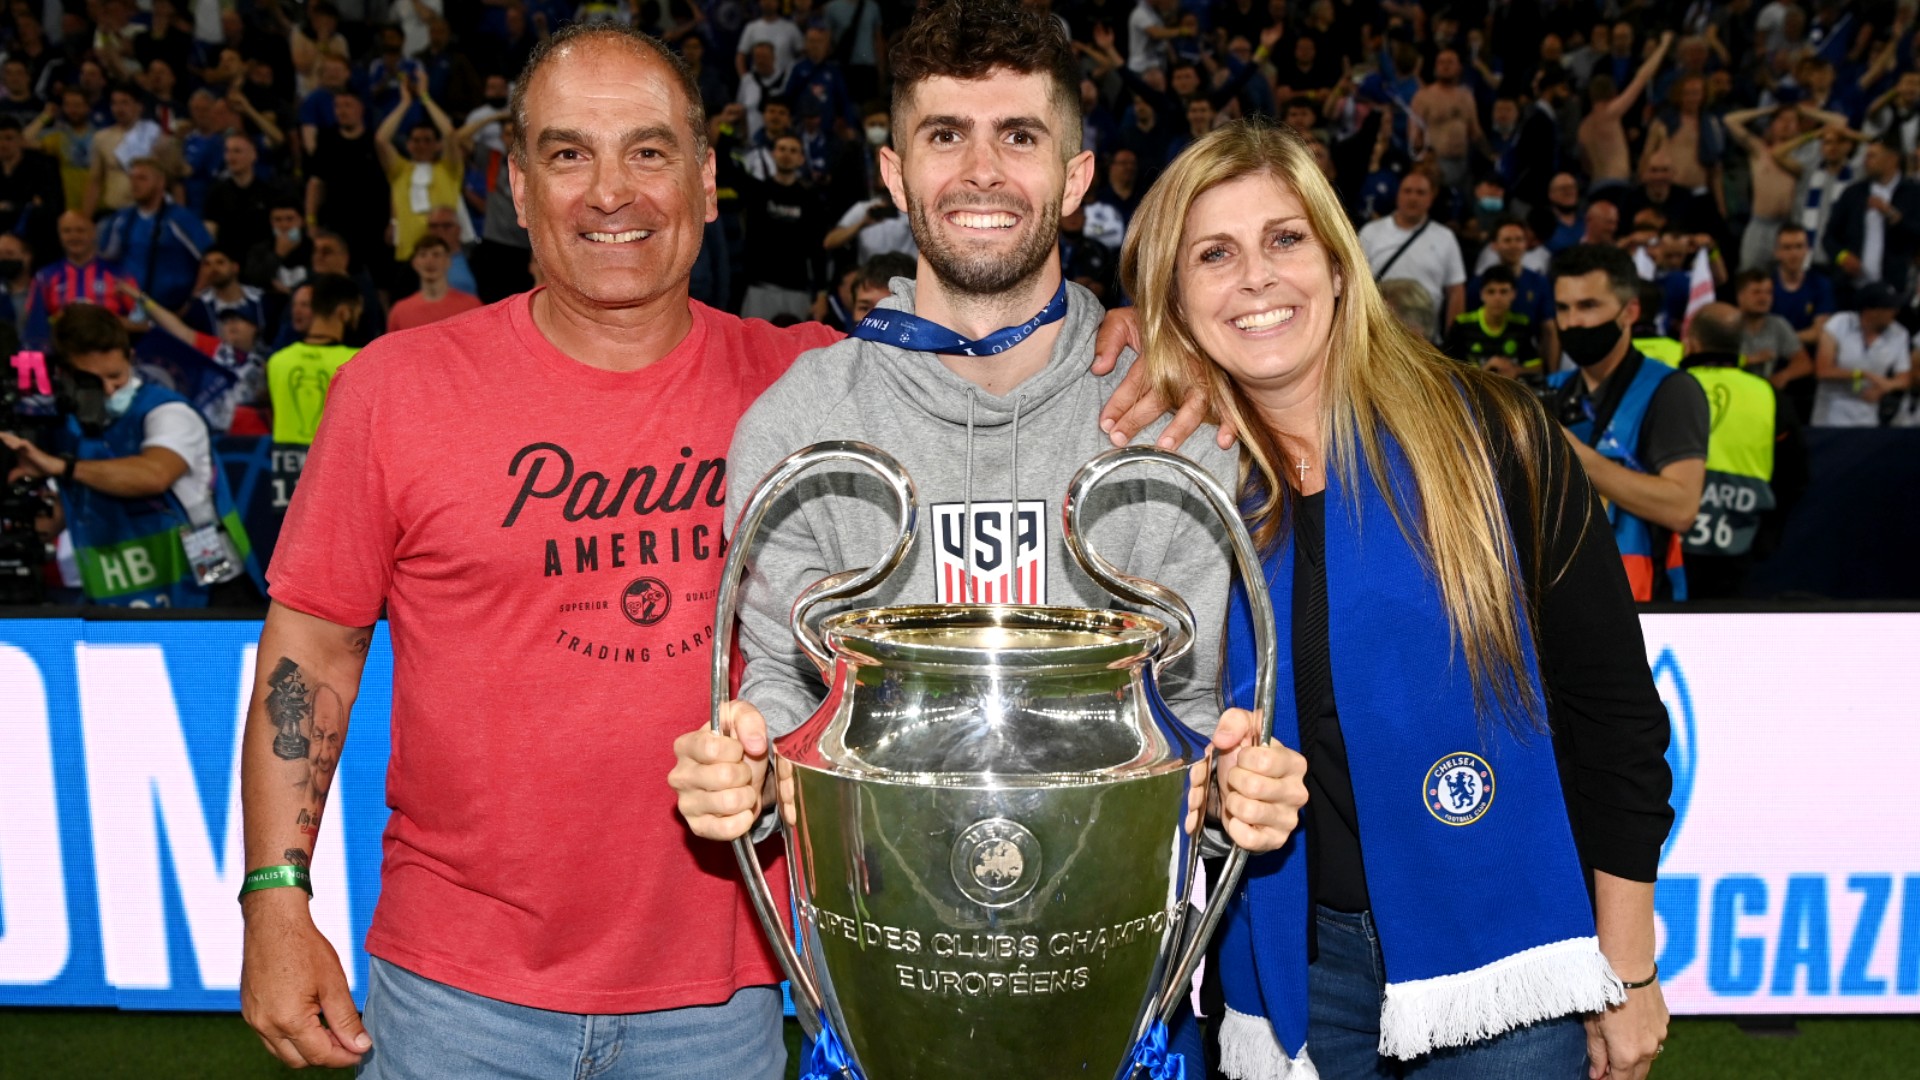 Christian Pulisic Parents and Family: Does he have a Girlfriend?